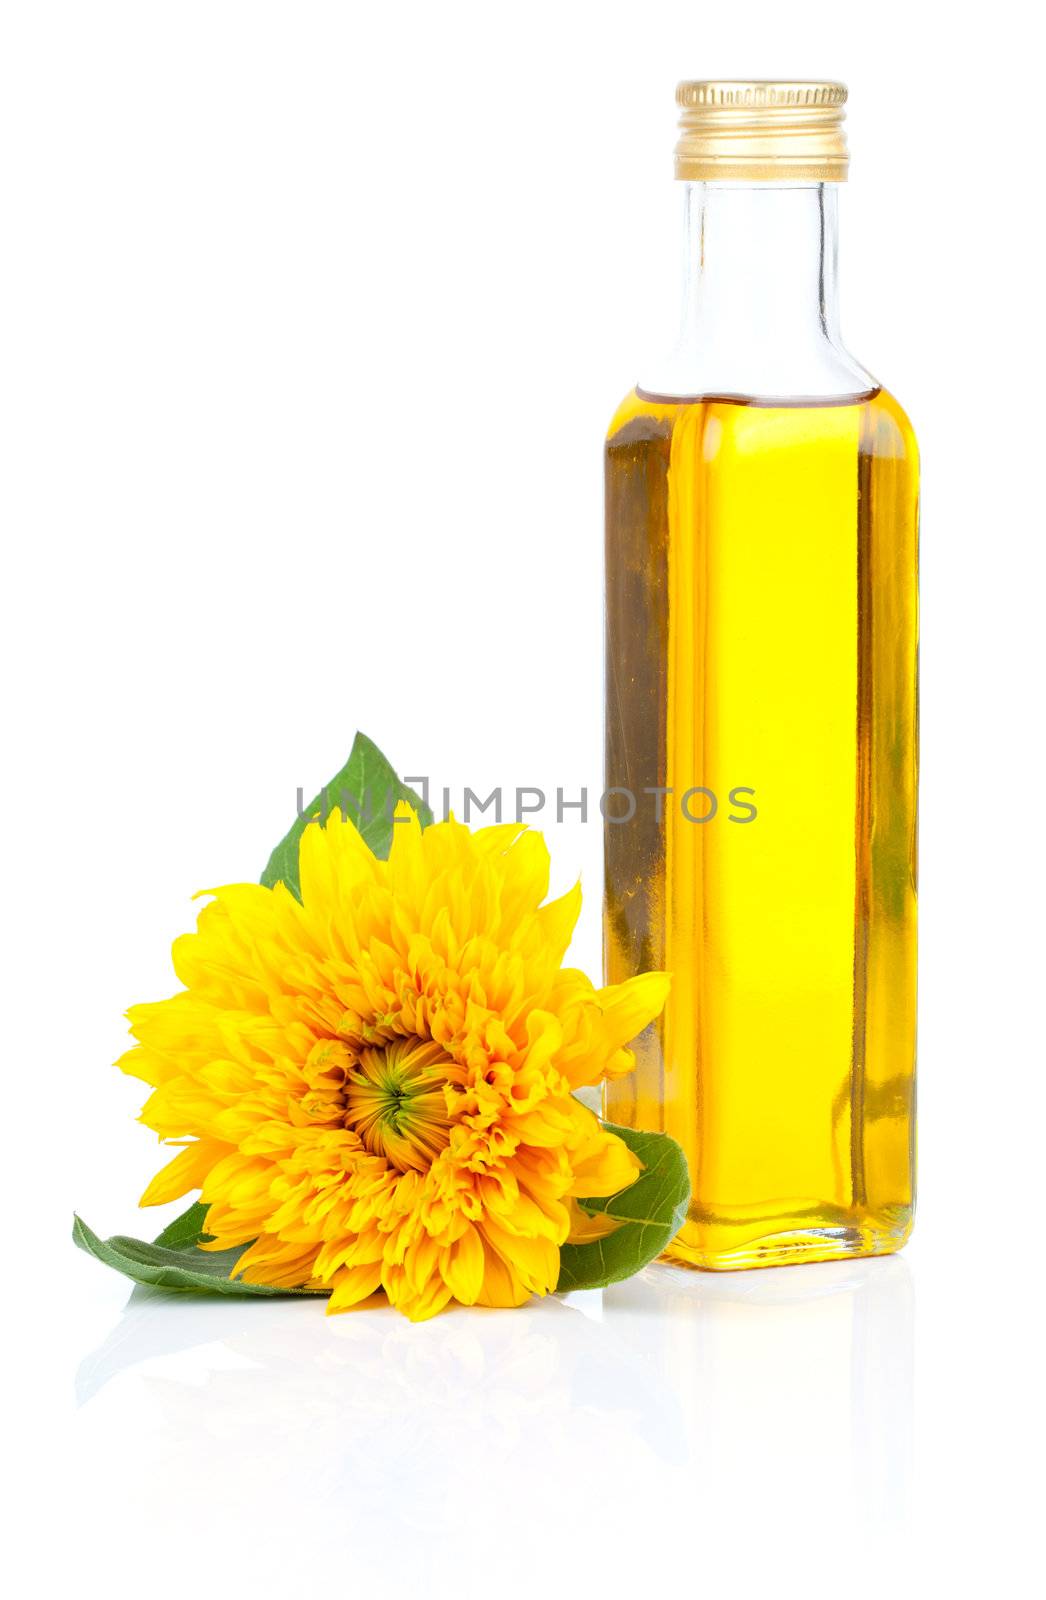 oil in glass bottle and sunflowers, isolated on white by motorolka